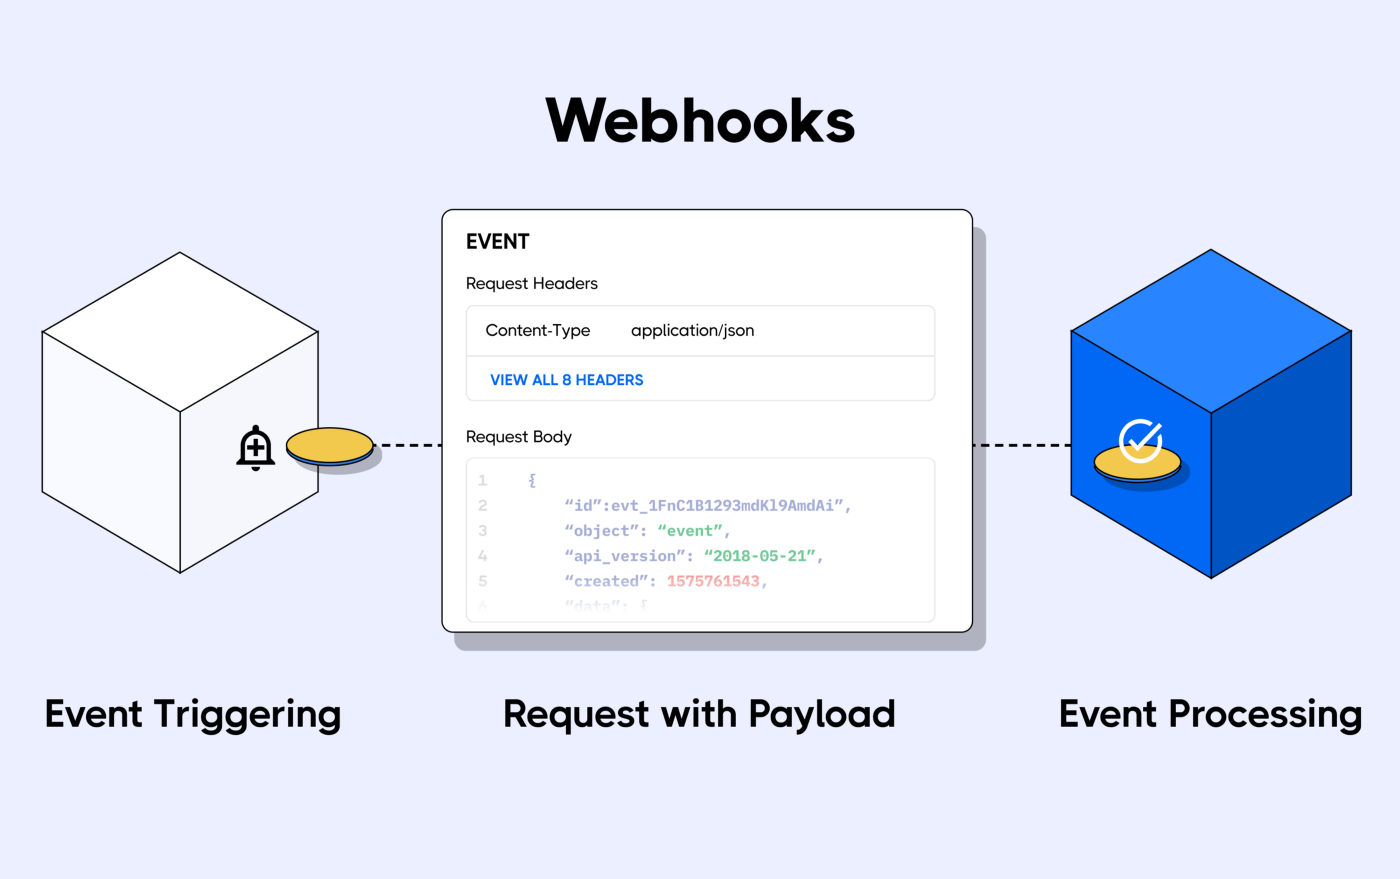 Webhooks consist of event triggering, request with payload, and event processing.